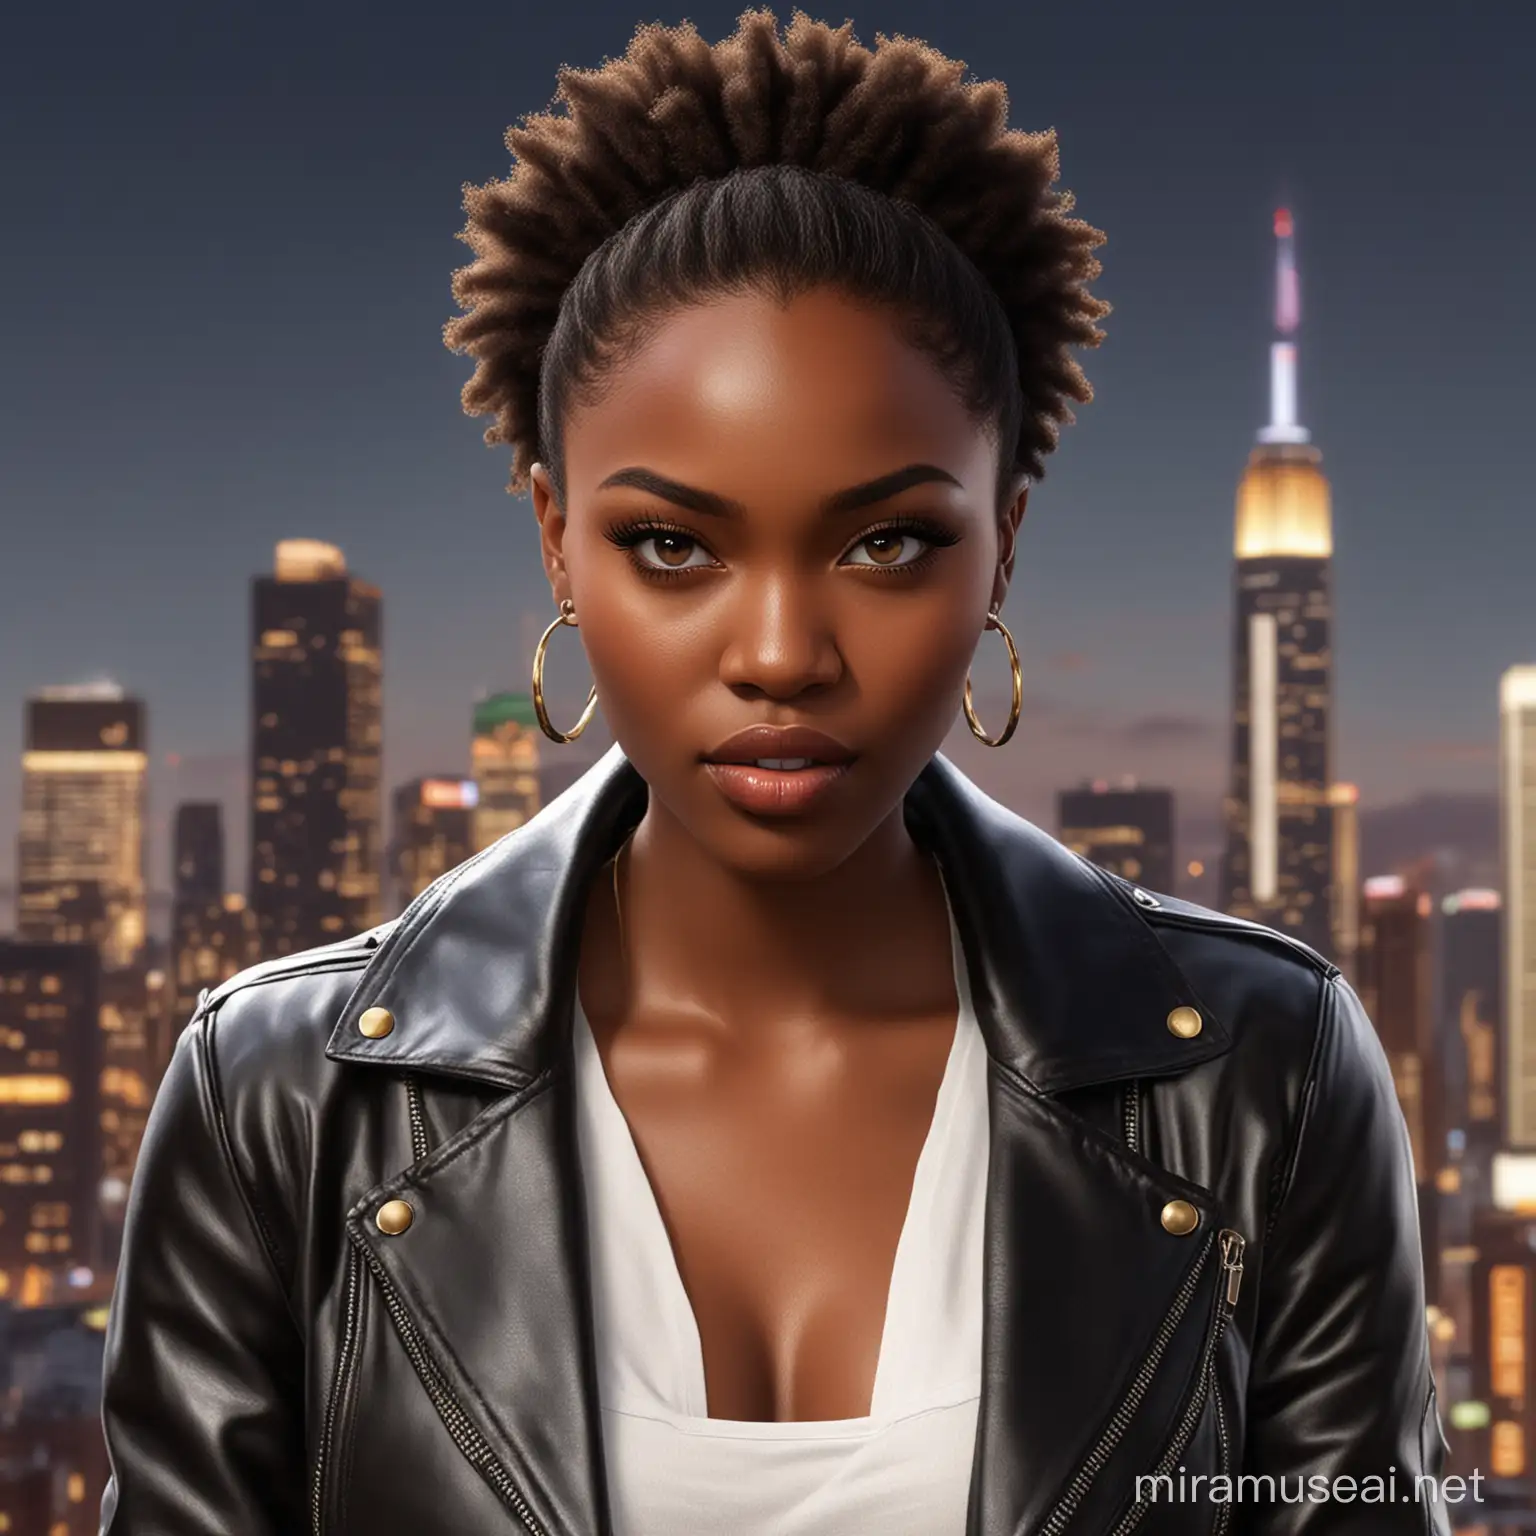 Hyperrealistic African Woman in Leather Jacket against New York City Lights